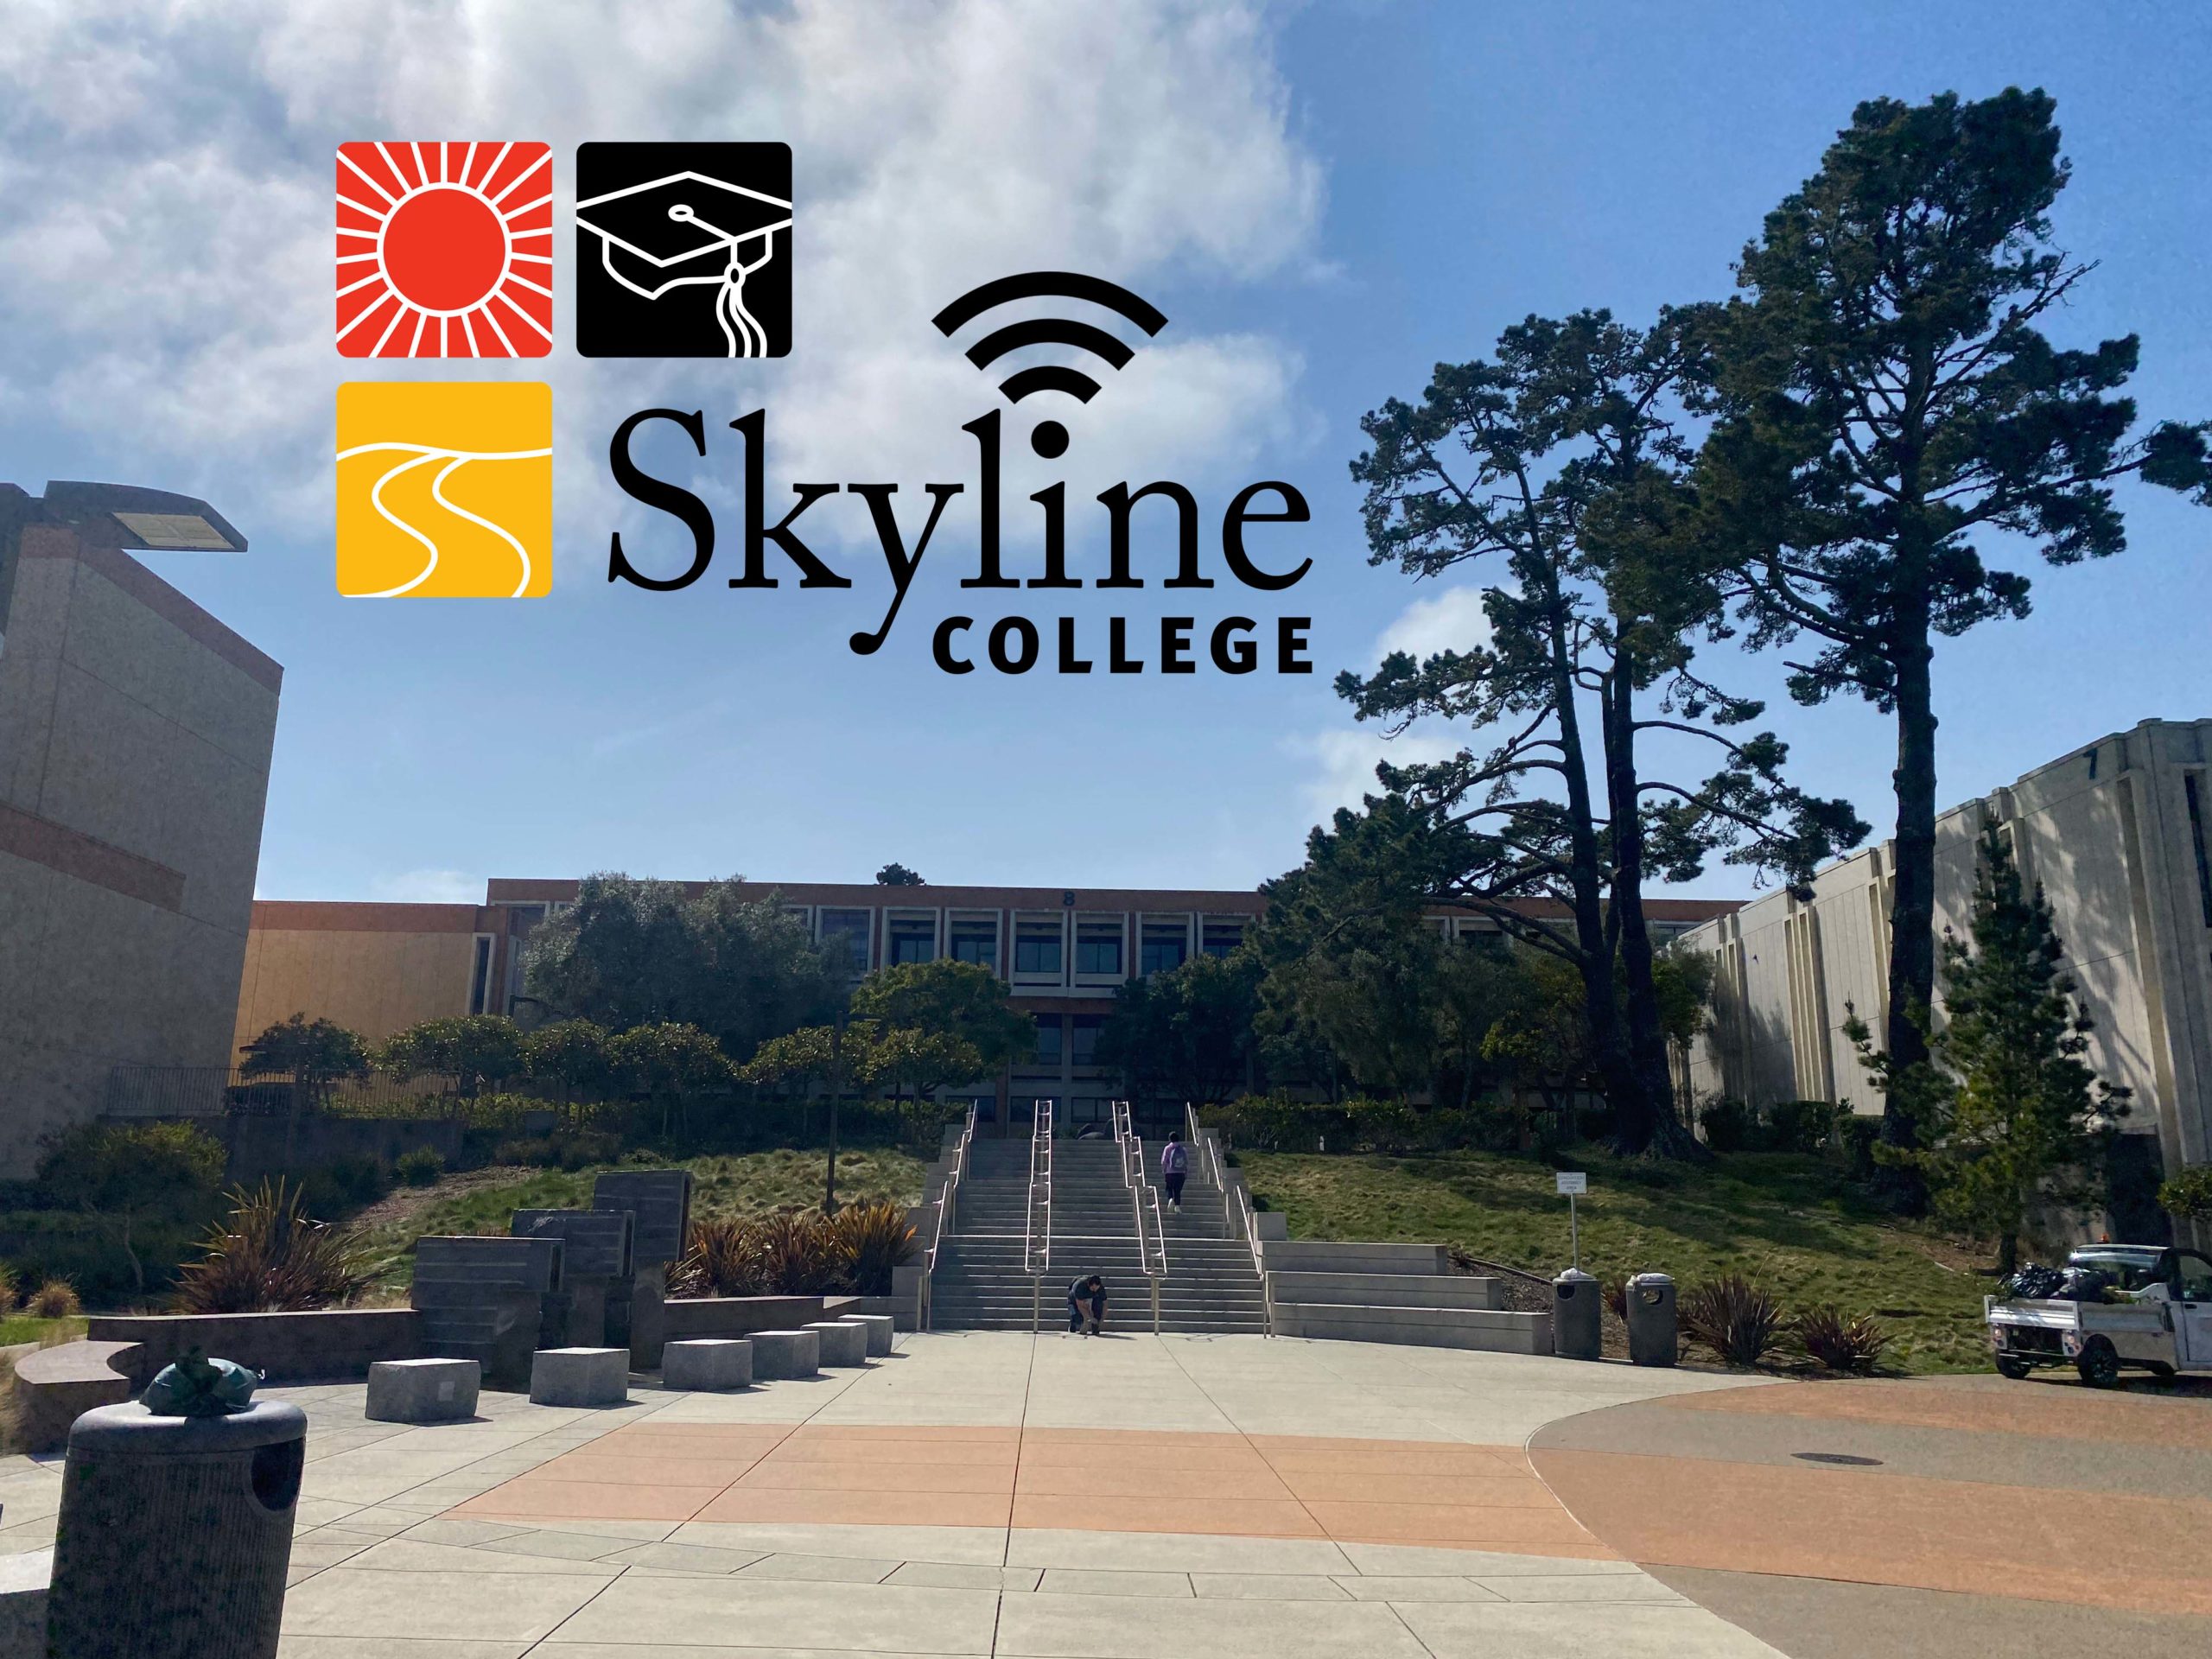 Skyline’s Wi-Fi issues continue to plague the student body, faculty, and its delivery of a quality community college education.